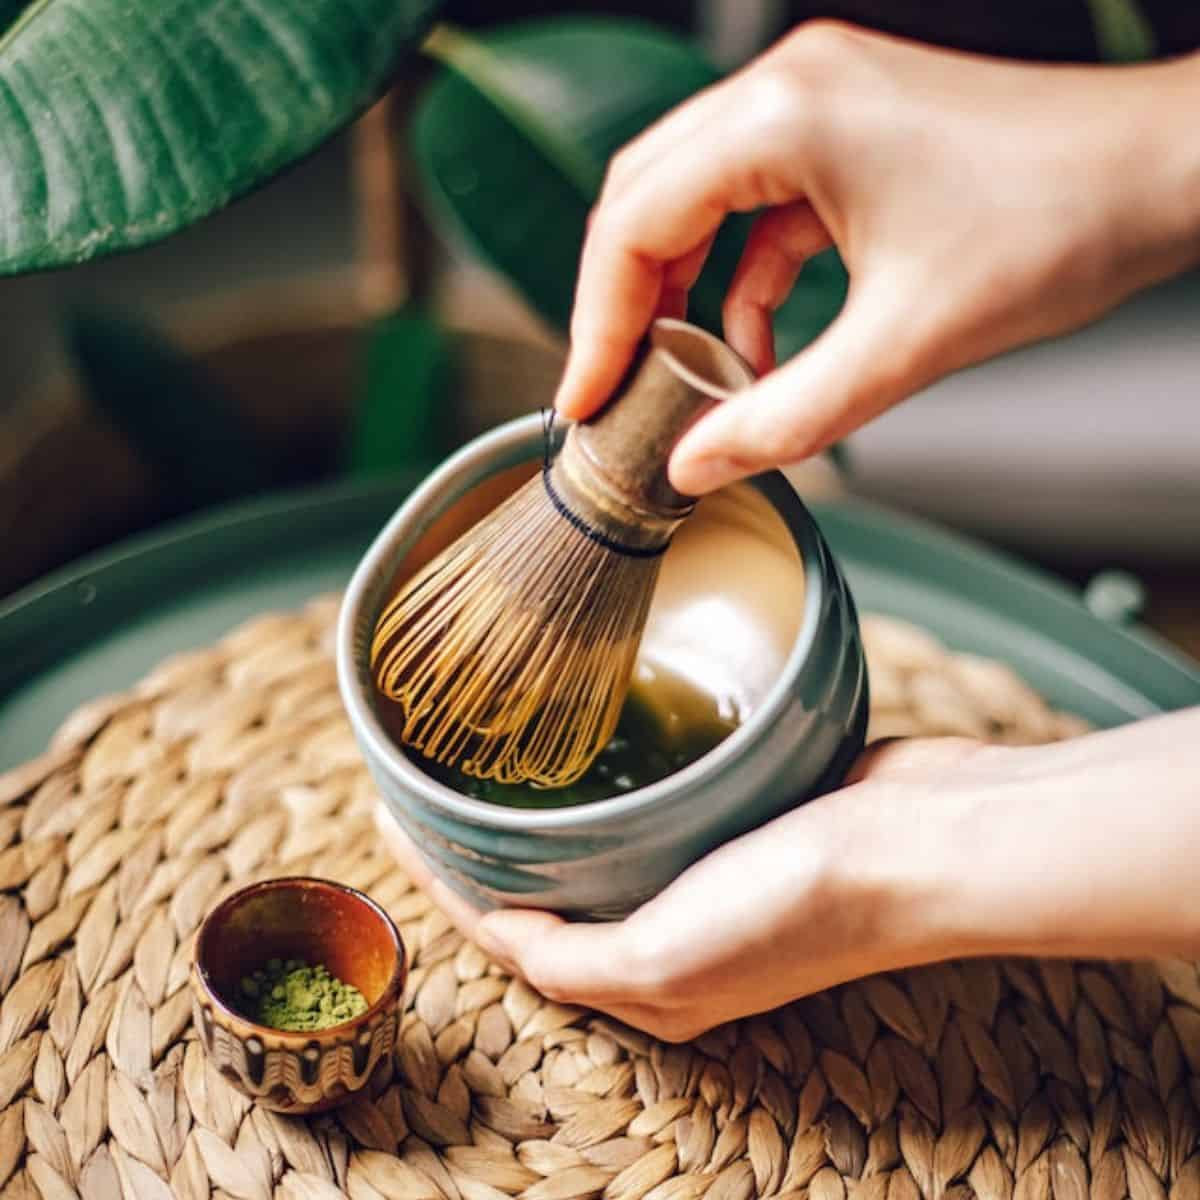 A person whisking the green tea using a bamboo whisk